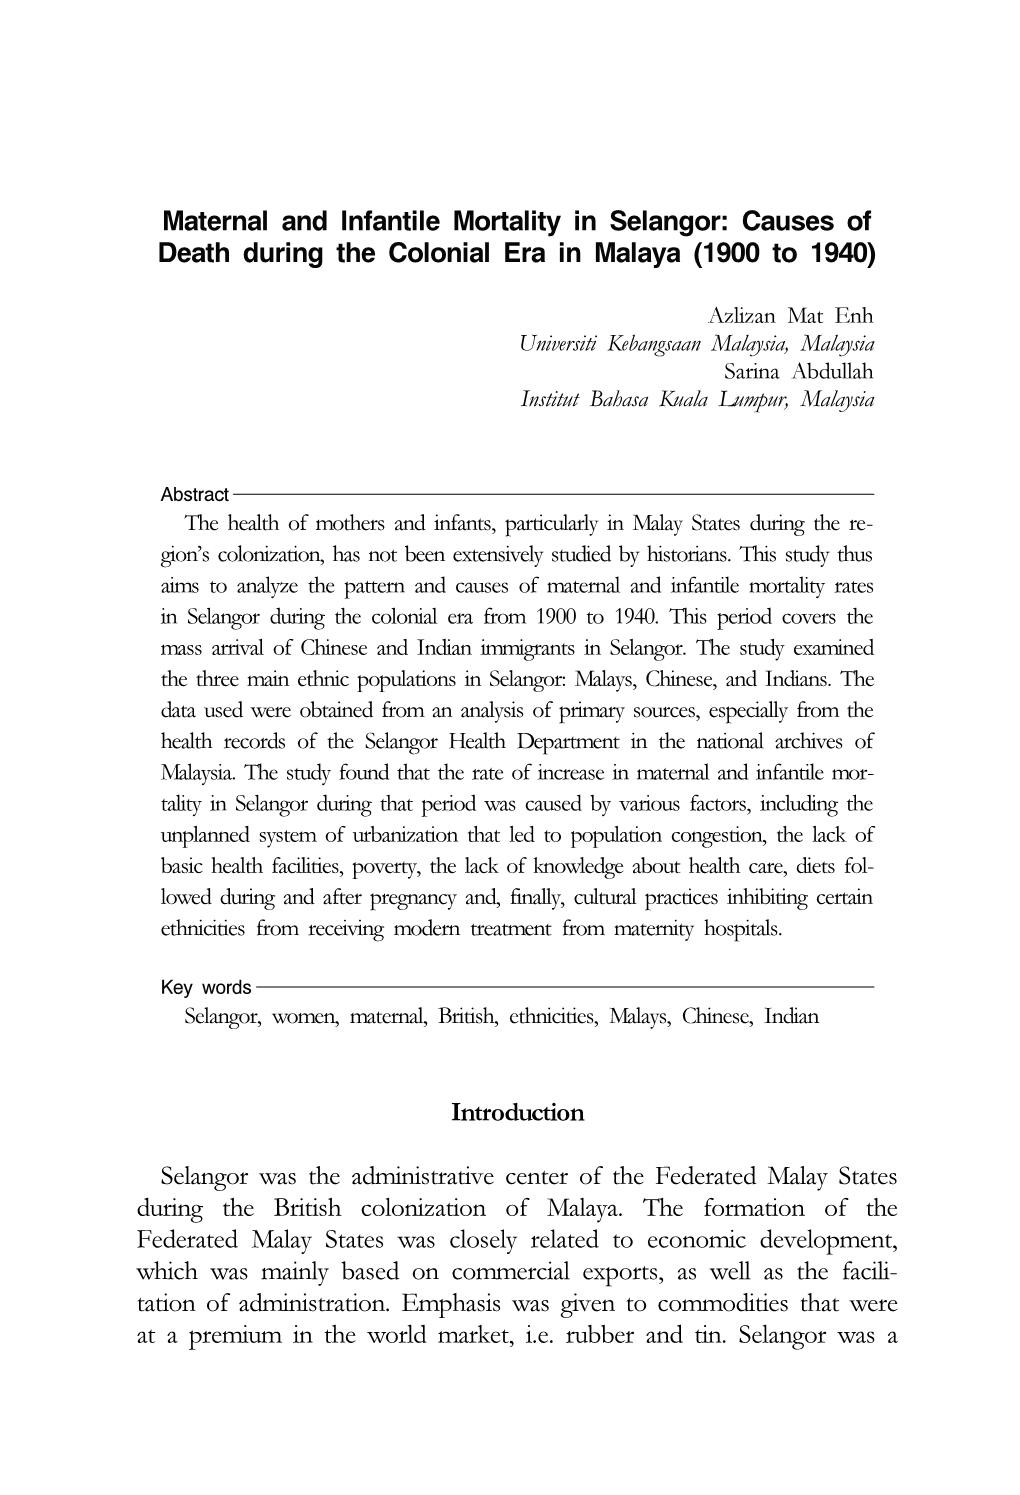 Maternal and Infantile Mortality in Selangor: Causes of Death During the Colonial Era in Malaya (1900 to 1940)